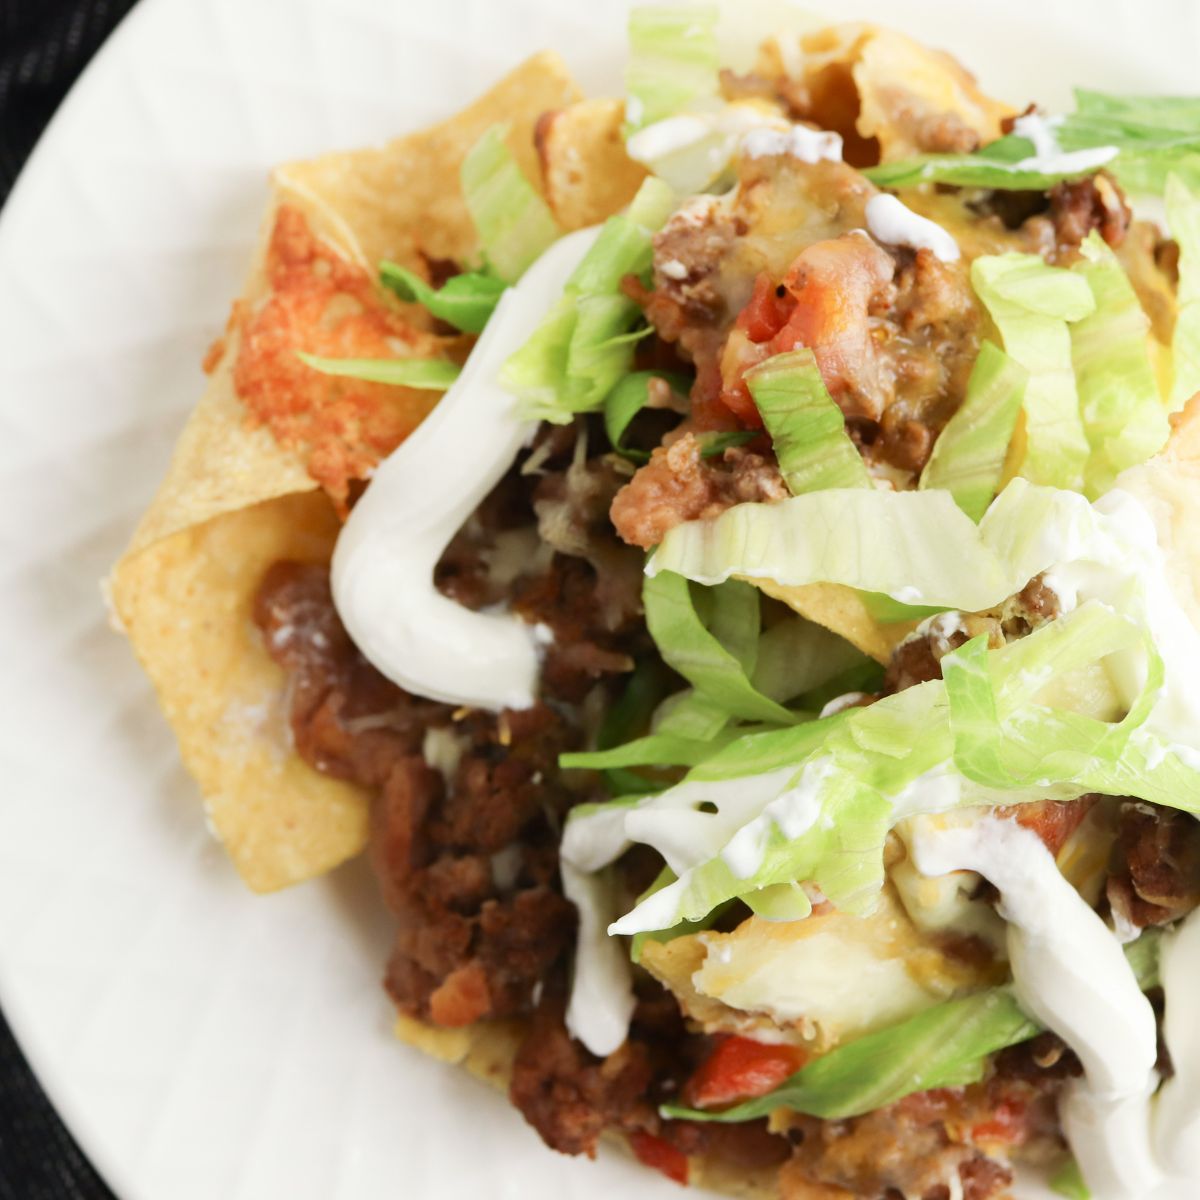 A plate topped with nachos and sour cream.